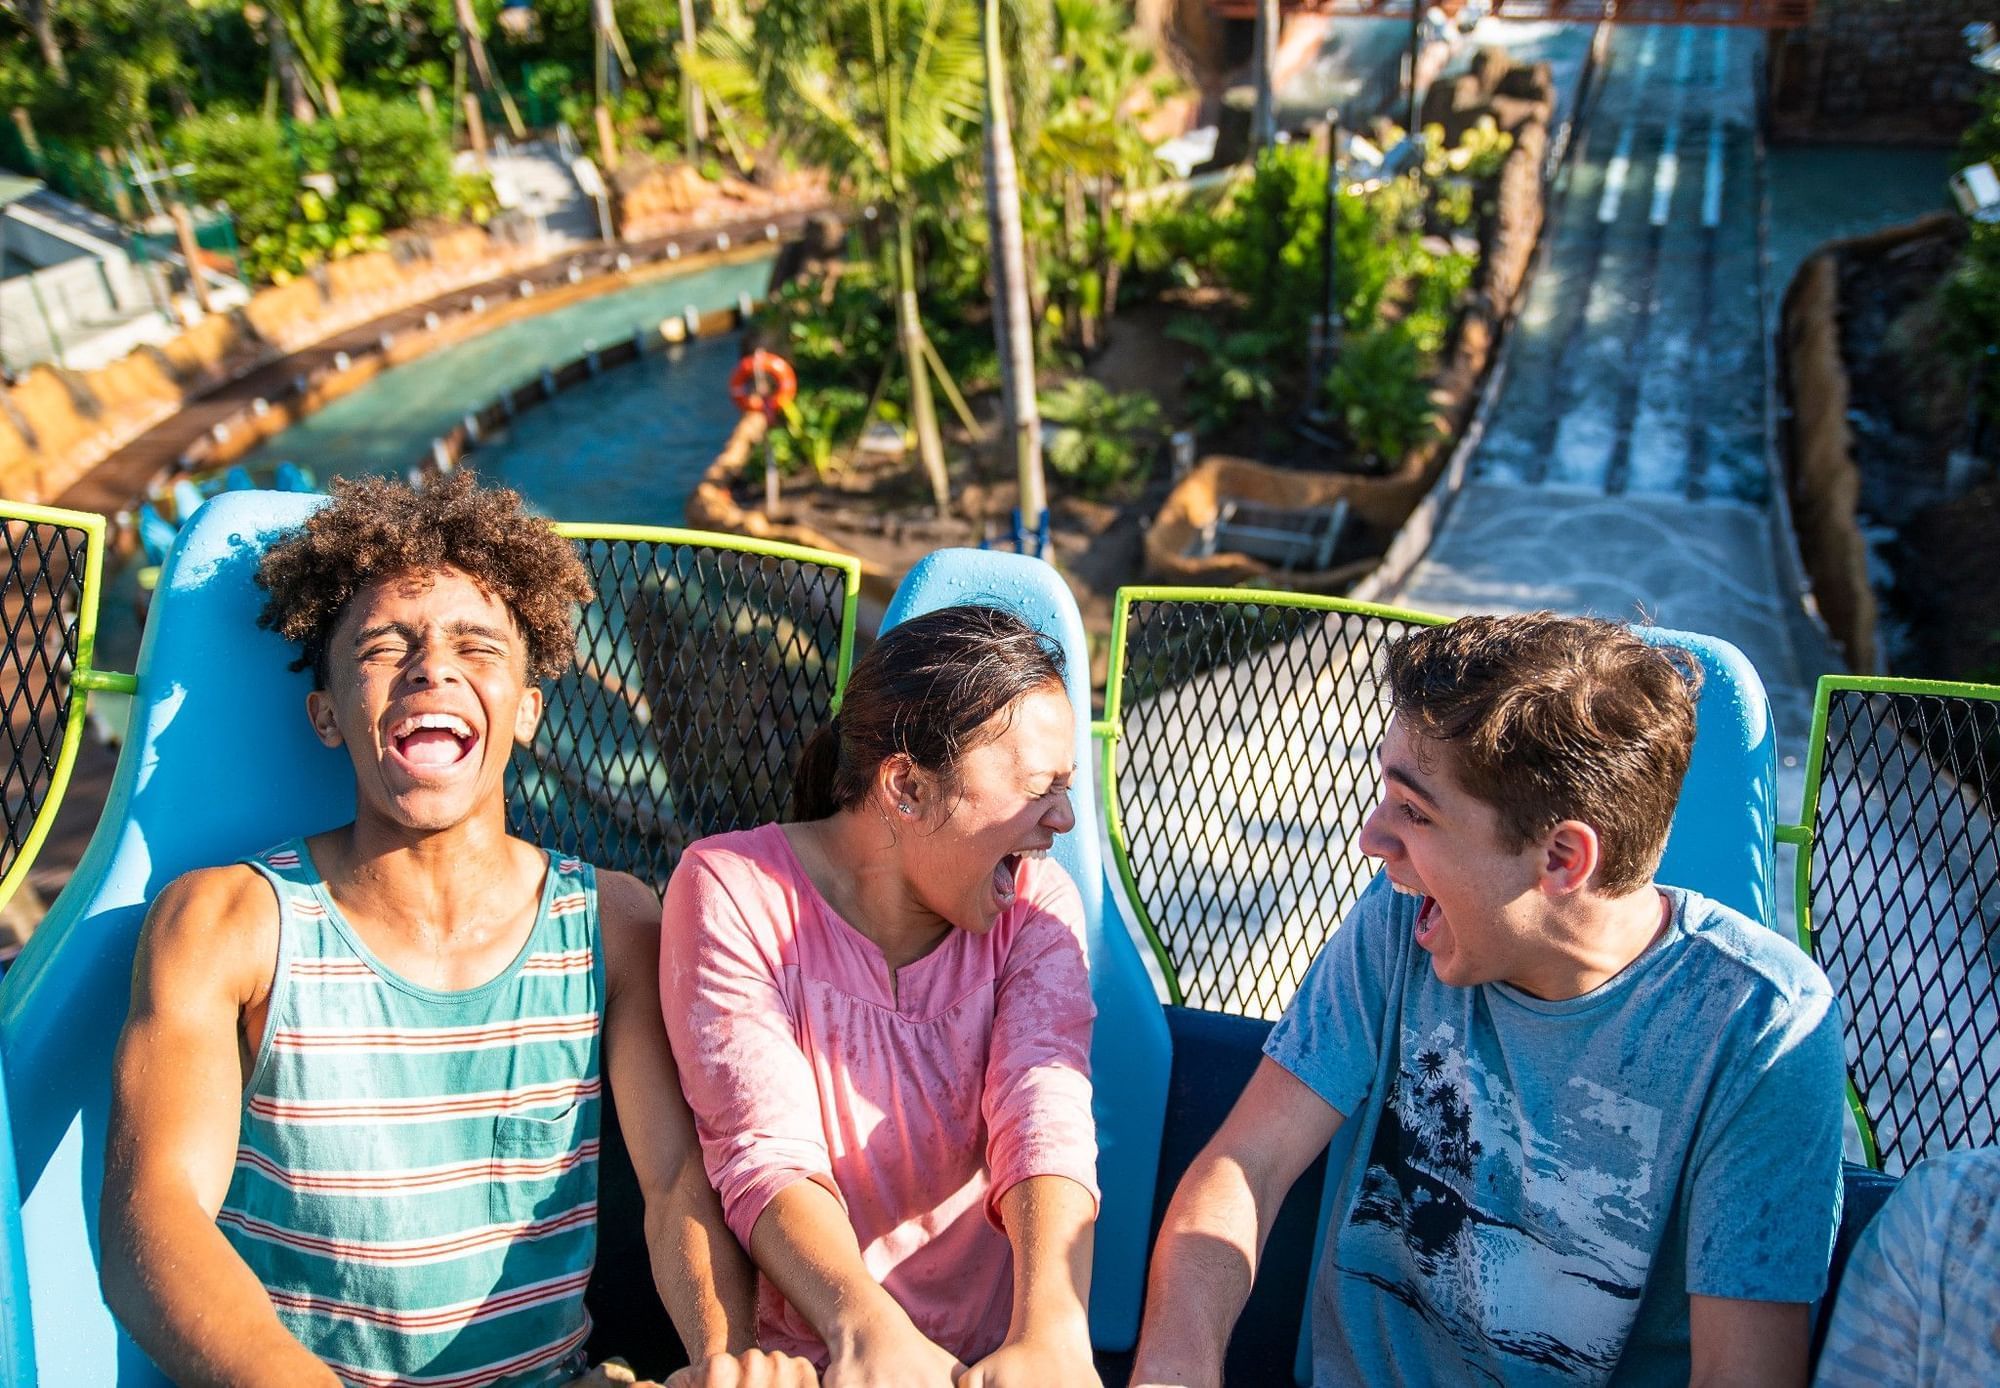 Teens laugh as they go up a hill on Infinity Falls, a water ride at SeaWorld Orlando.